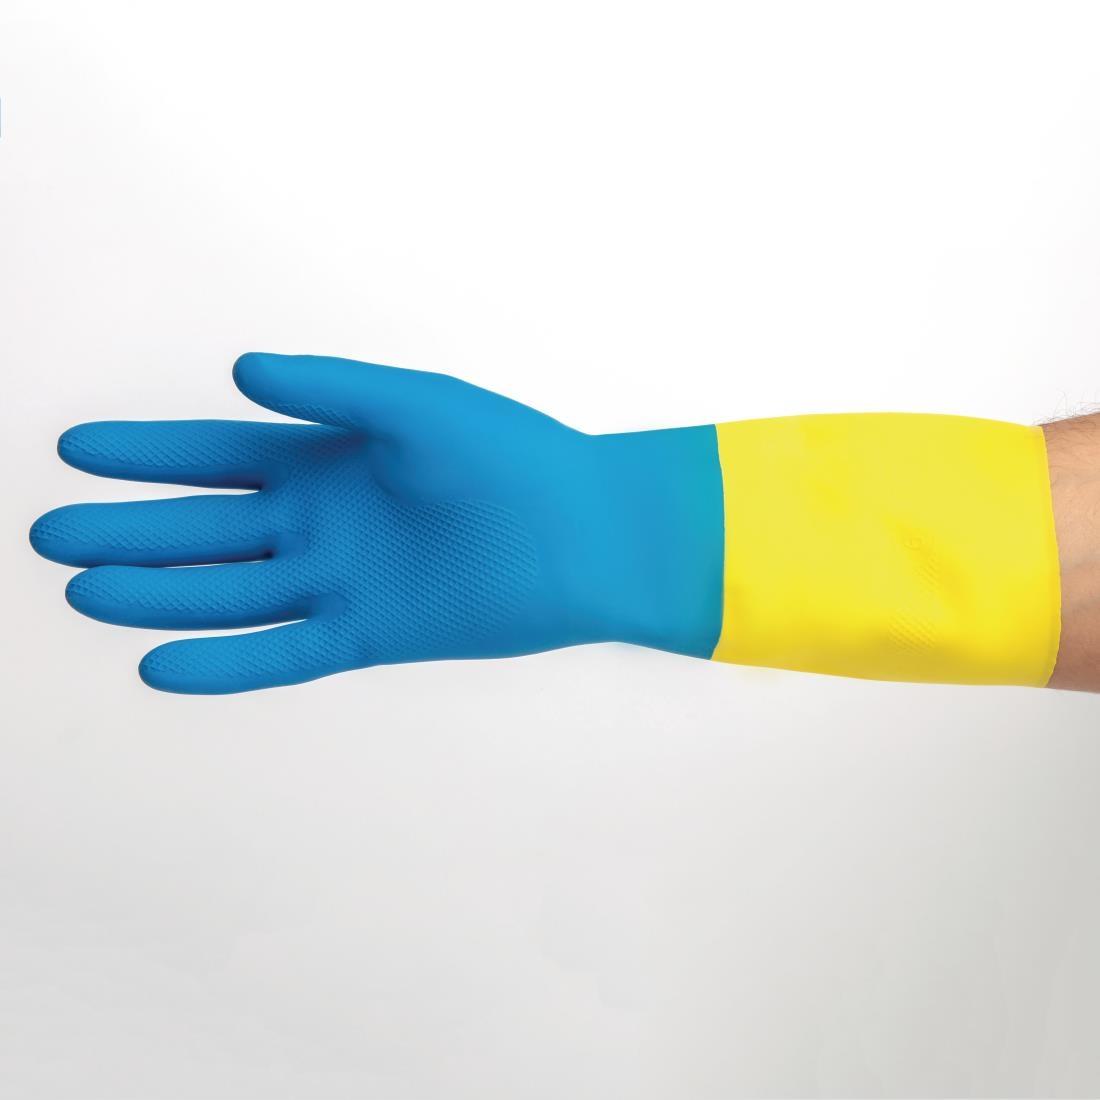 MAPA Alto 405 Liquid-Proof Heavy-Duty Janitorial Gloves Blue and Yellow Large - FA296-L  - 6